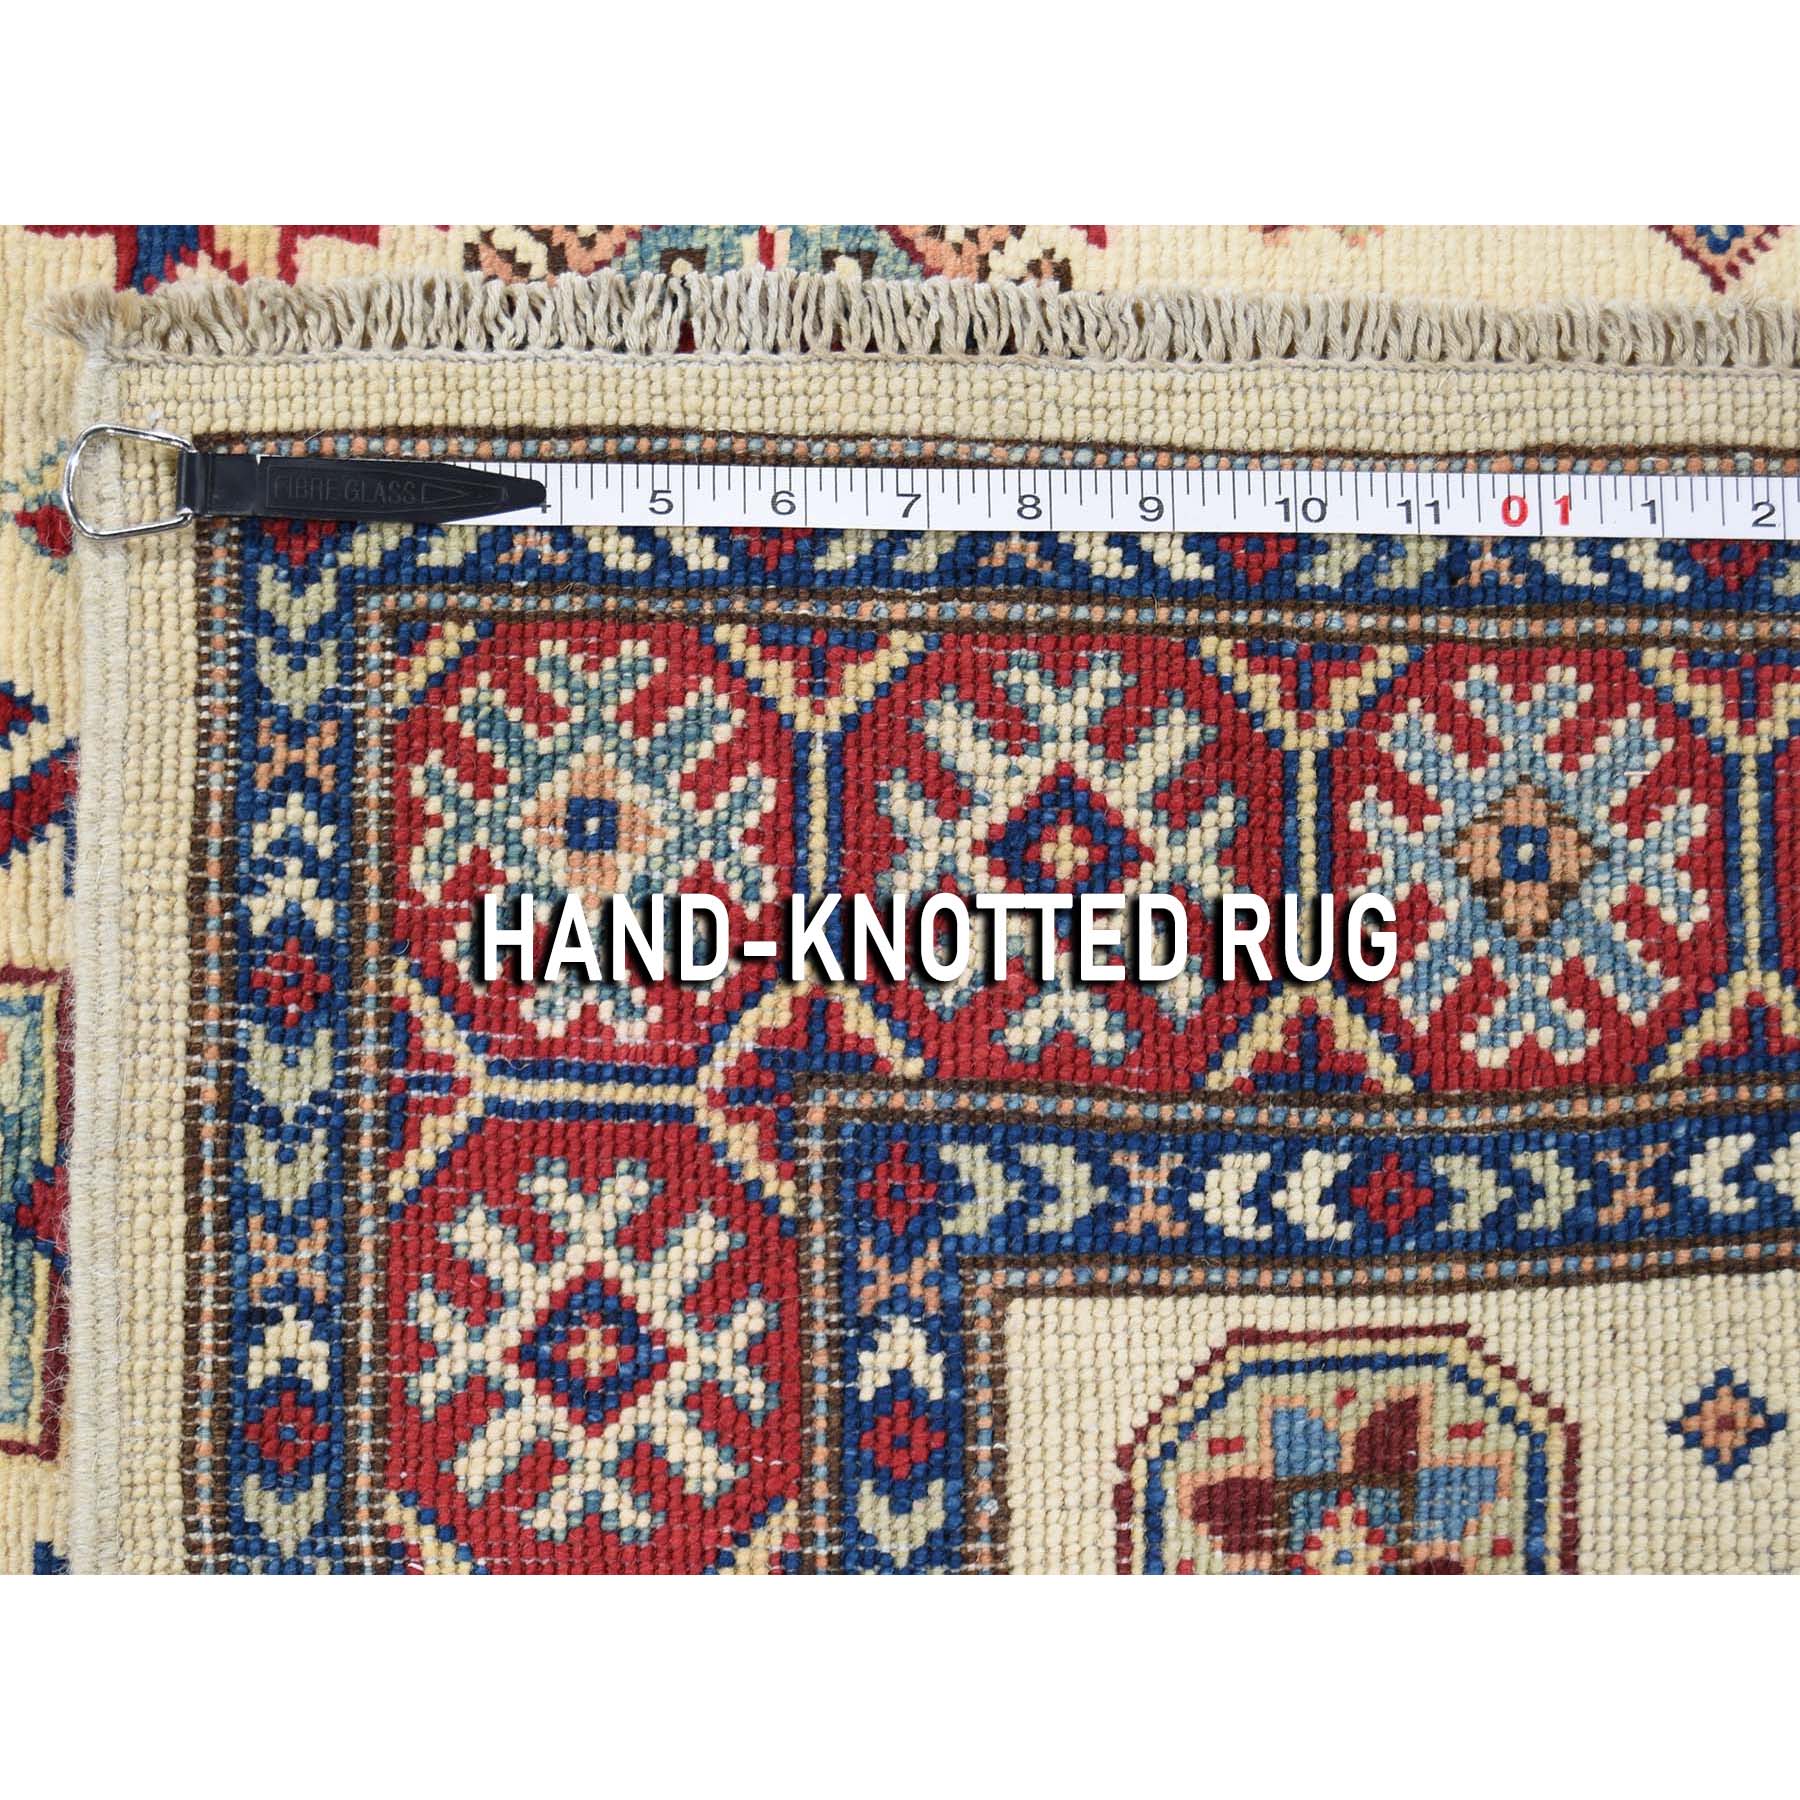 3-x4-10  Special Kazak Pure Wool Hand-Knotted Geometric Design Oriental Rug 